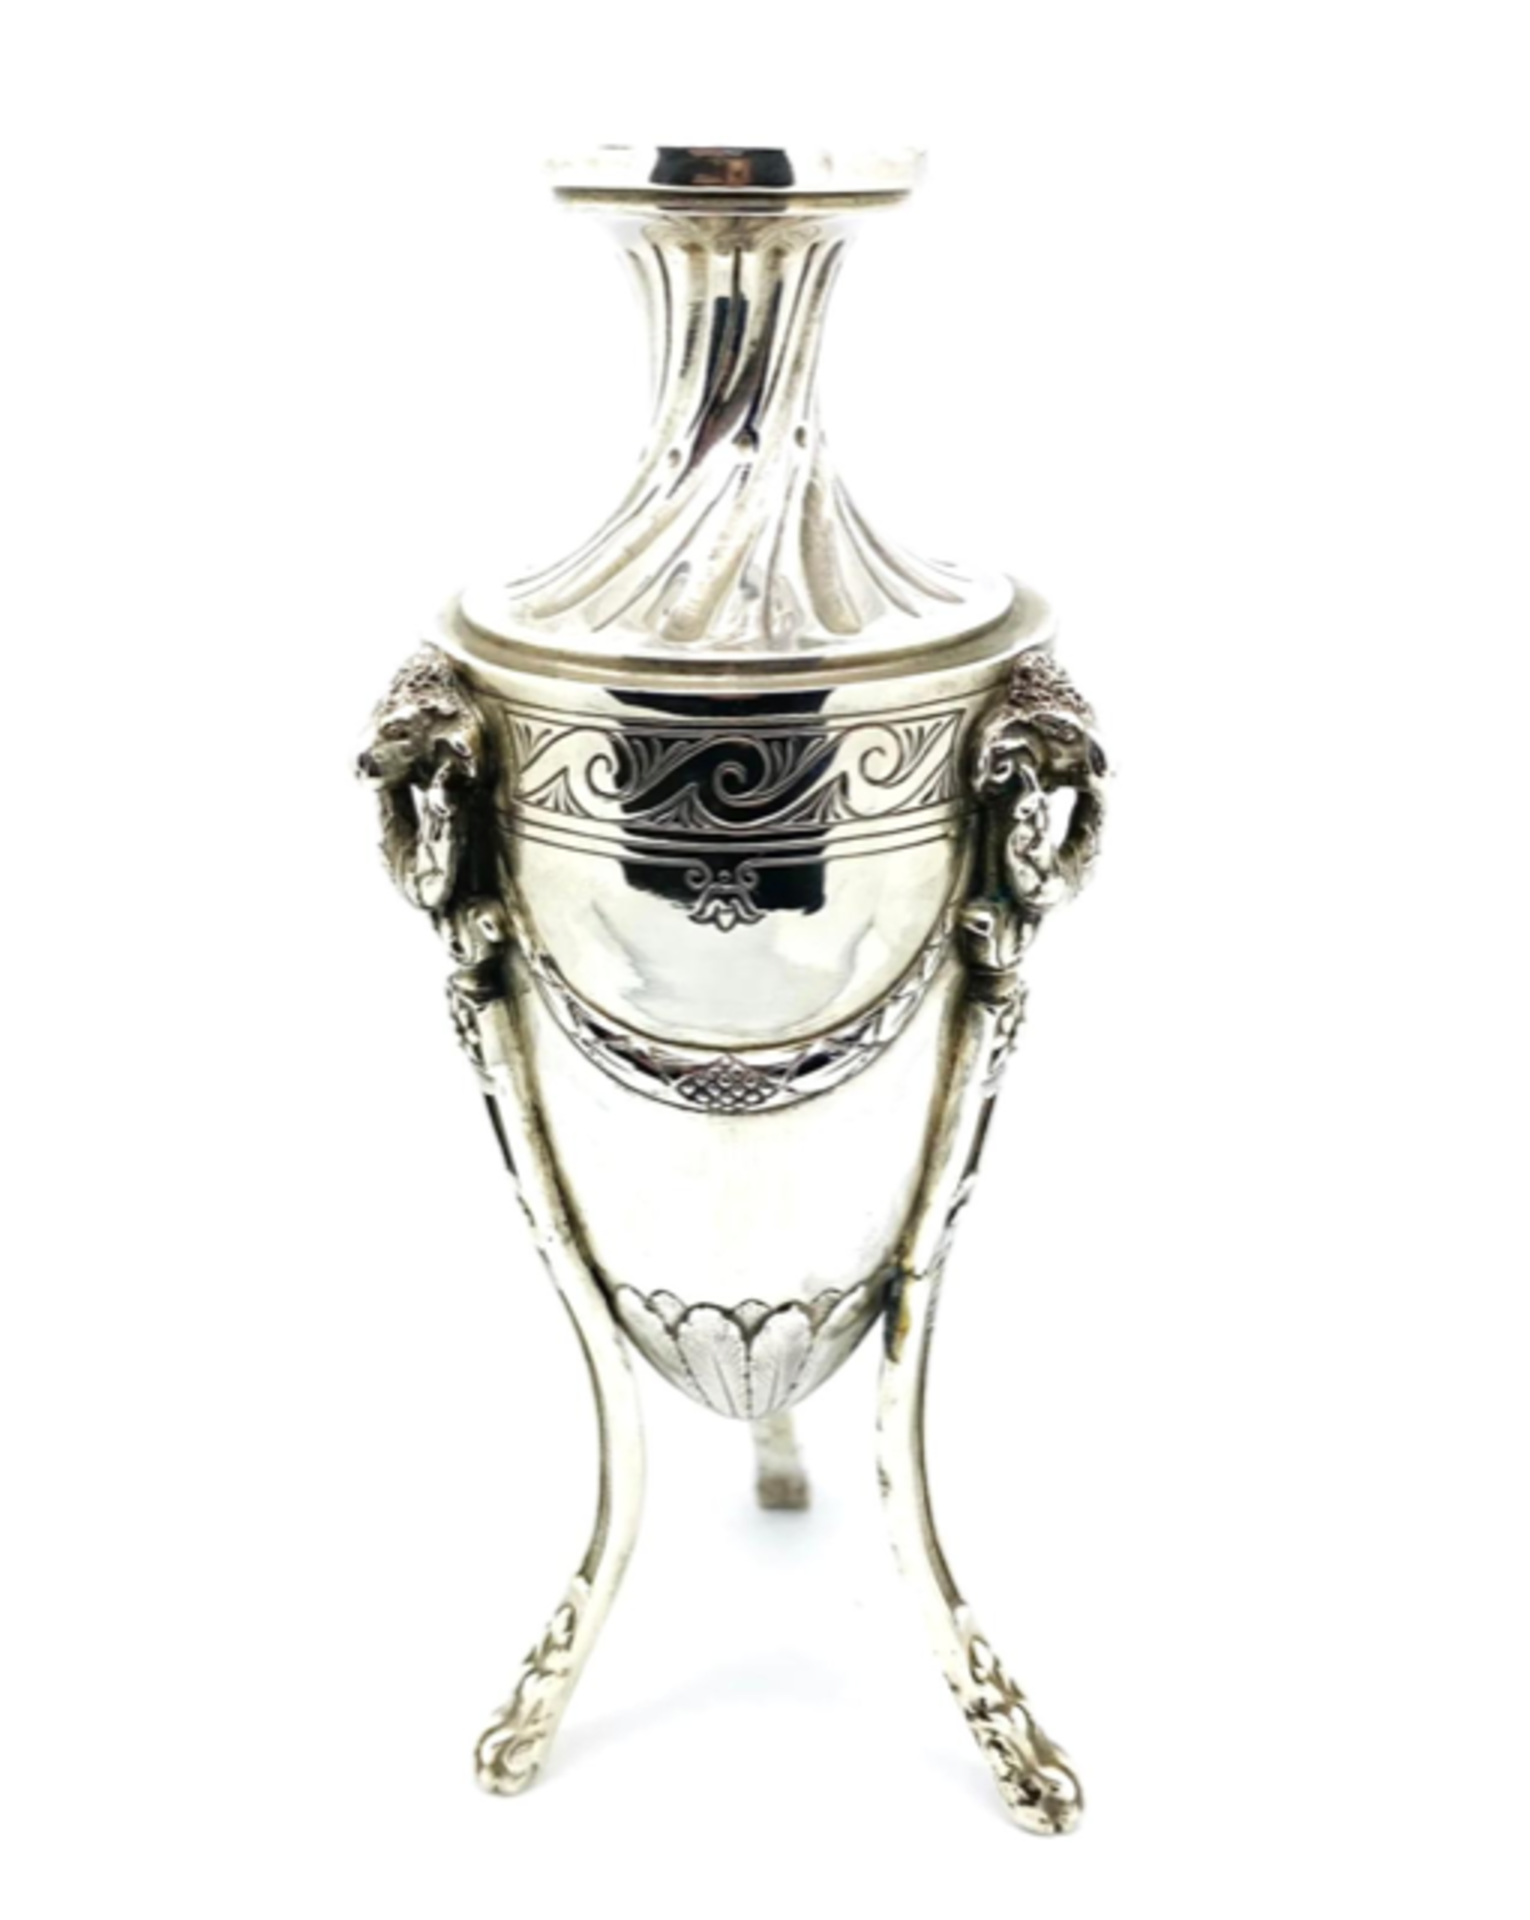 SOLID SILVER VASE HALLMARKED CHESTER. RARE. LARGE BERTHOLD MULLER PIECE 9". 369g REPAIR TO ONE LEG. - Image 2 of 3